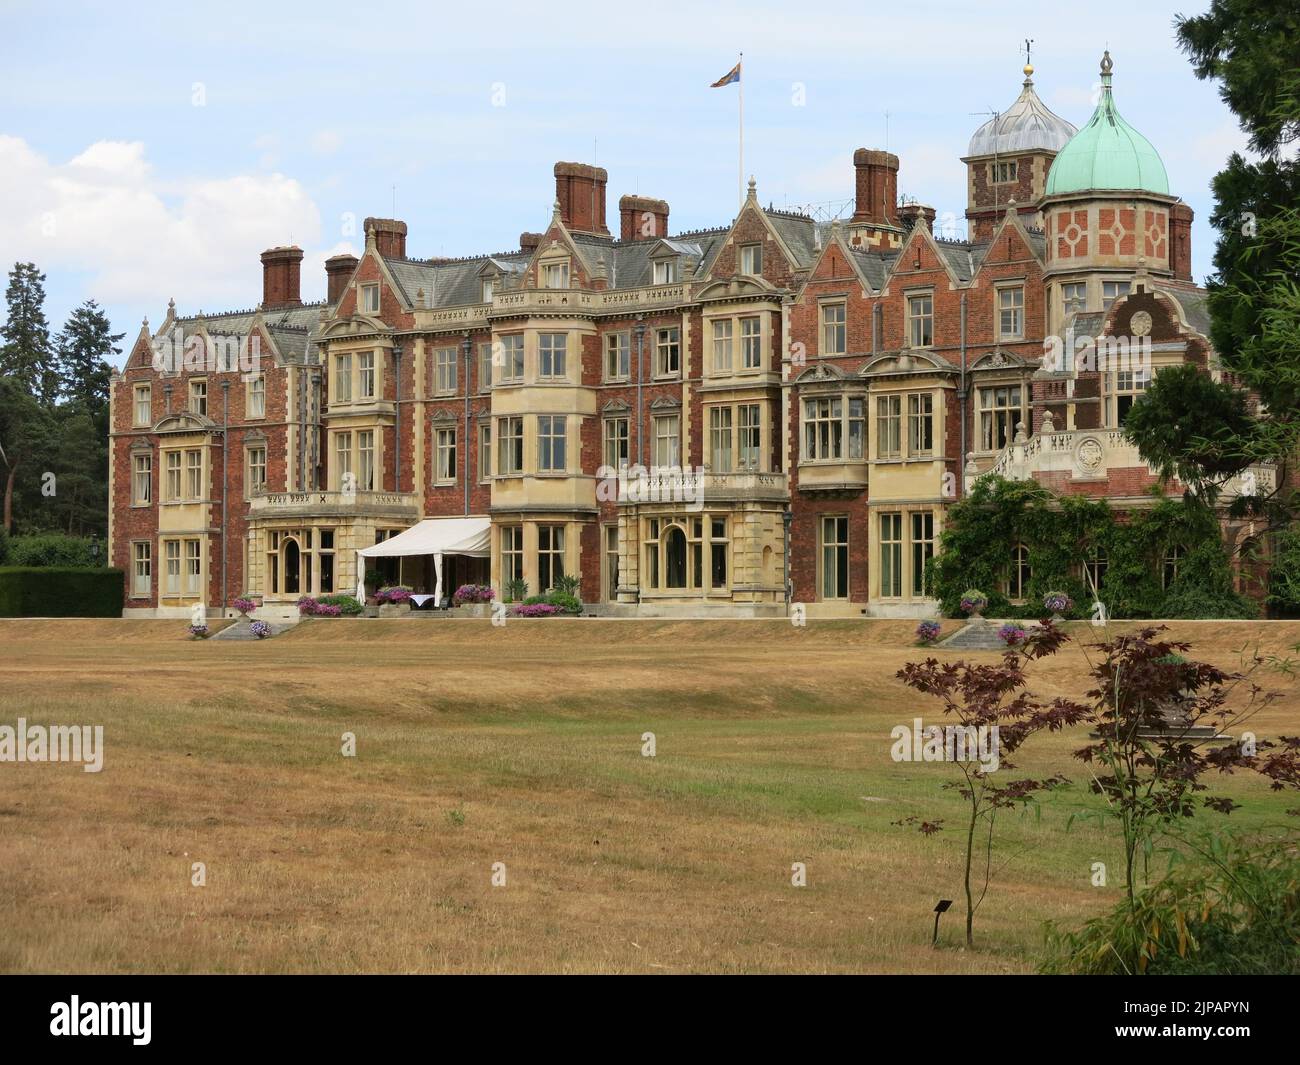 Queen Elizabeth II spends two months each winter at Sandringham House, the royal residence in Norfolk that has been a private home for 4 generations. Stock Photo